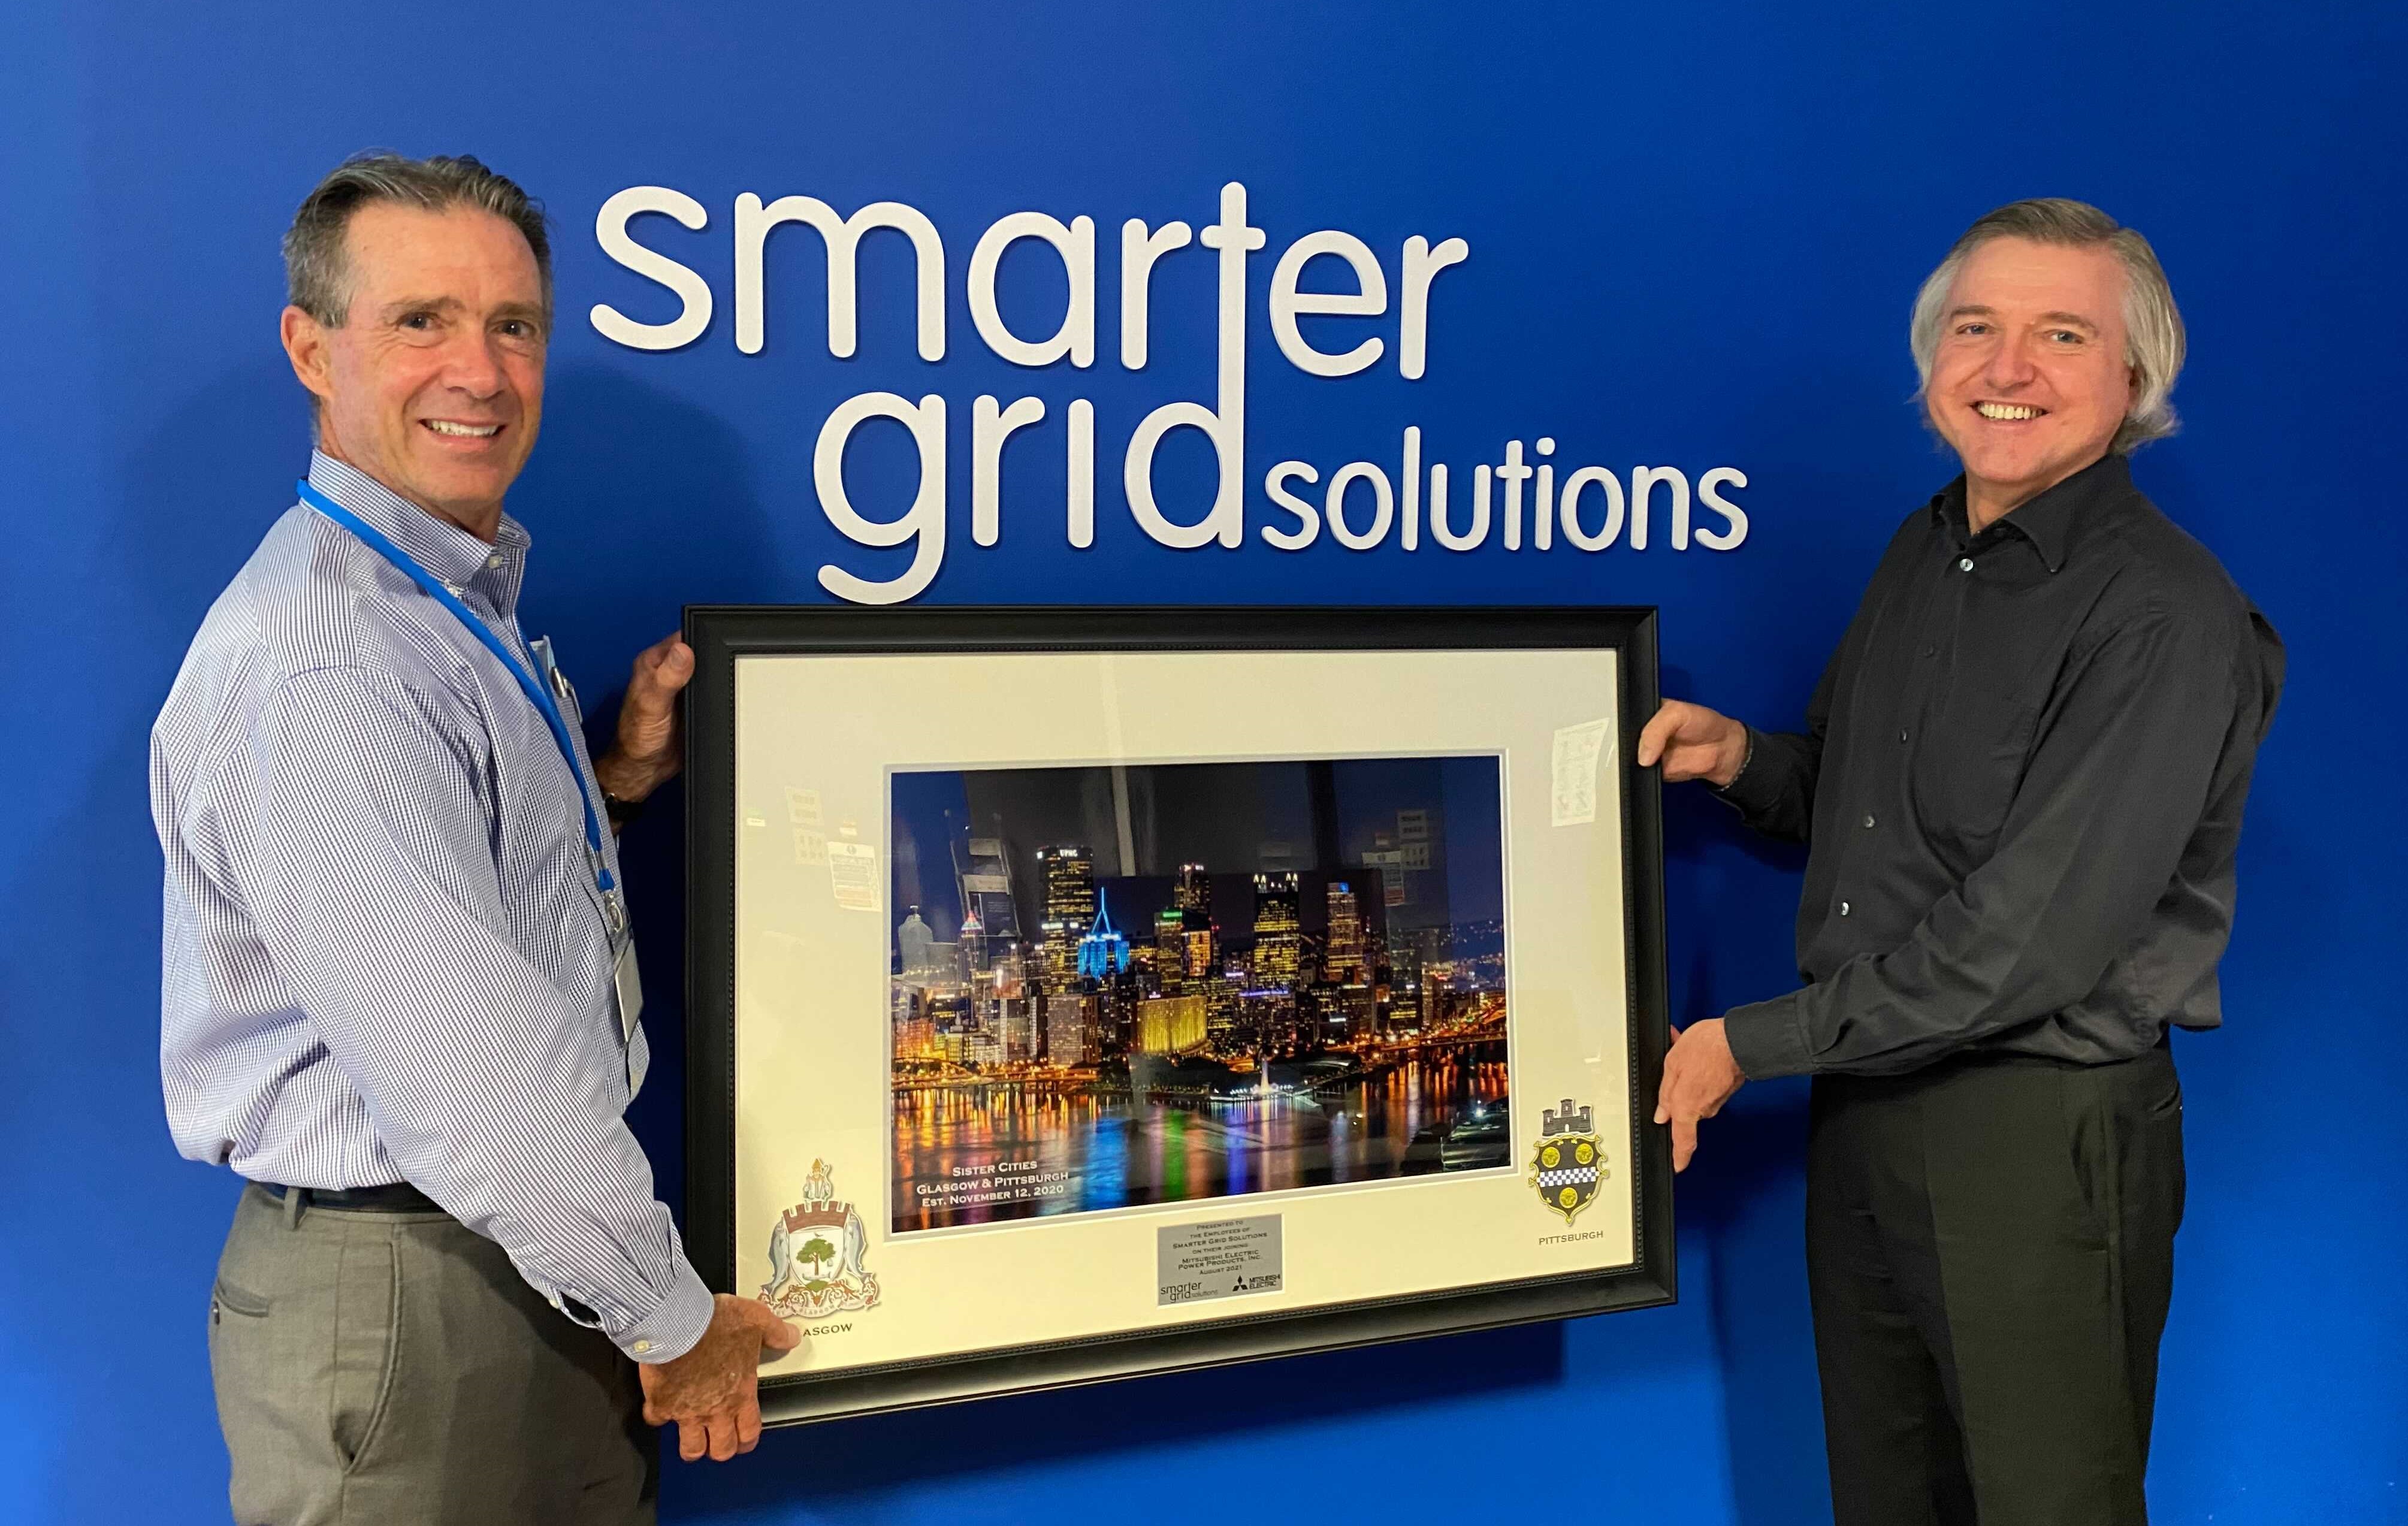 Brian Heery, MEPPI CEO and Brent Marshall, Smarter Grid Solutions CEO